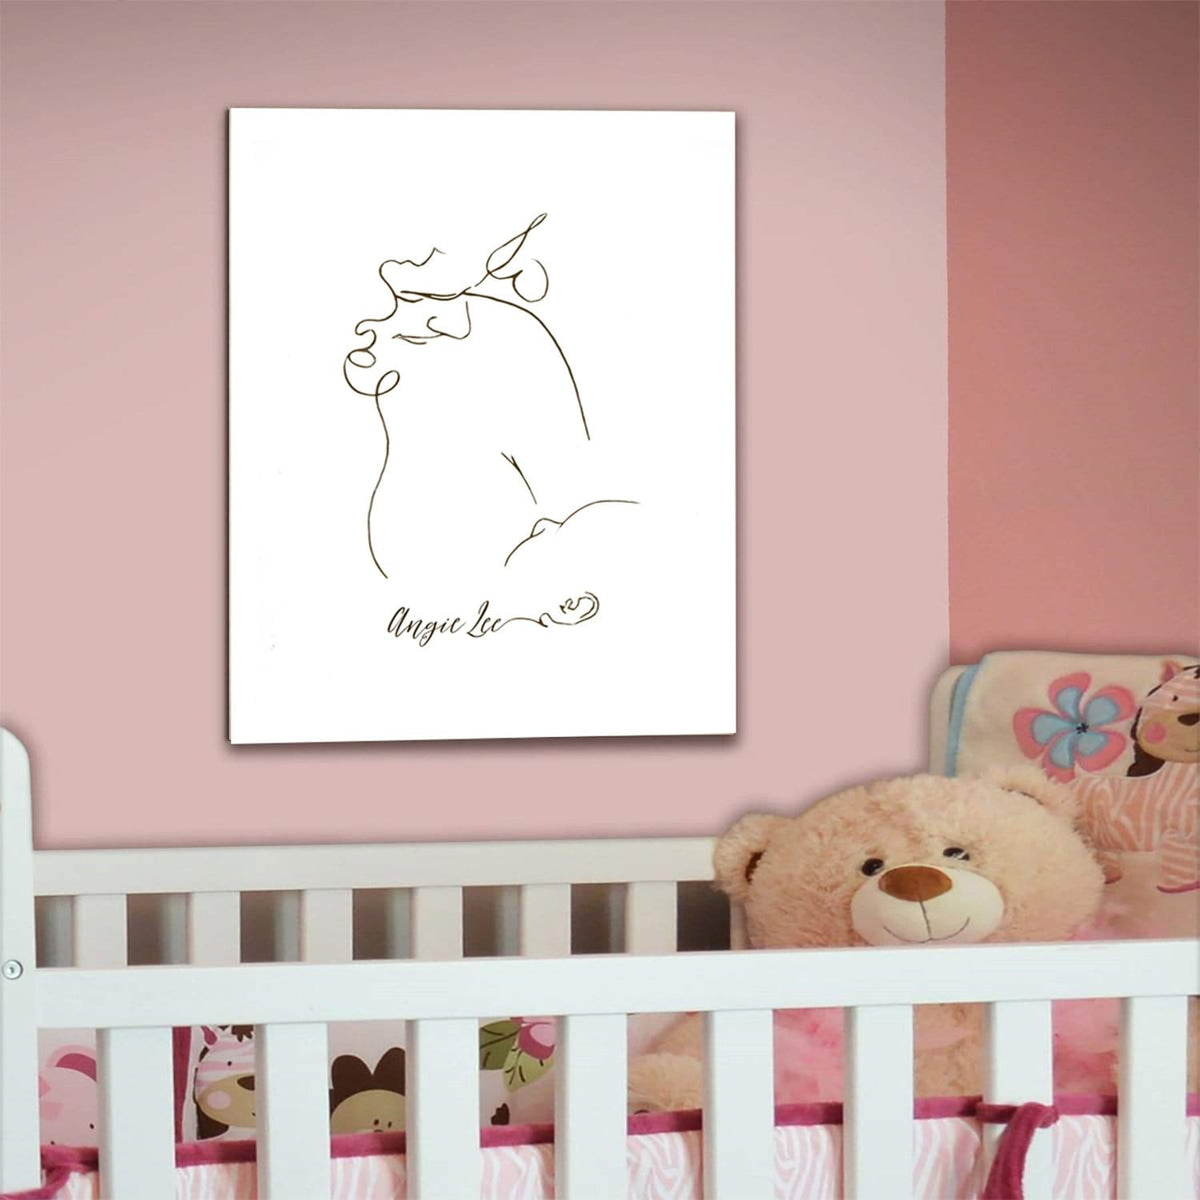 Nursery wall art decor from Personal-Prints